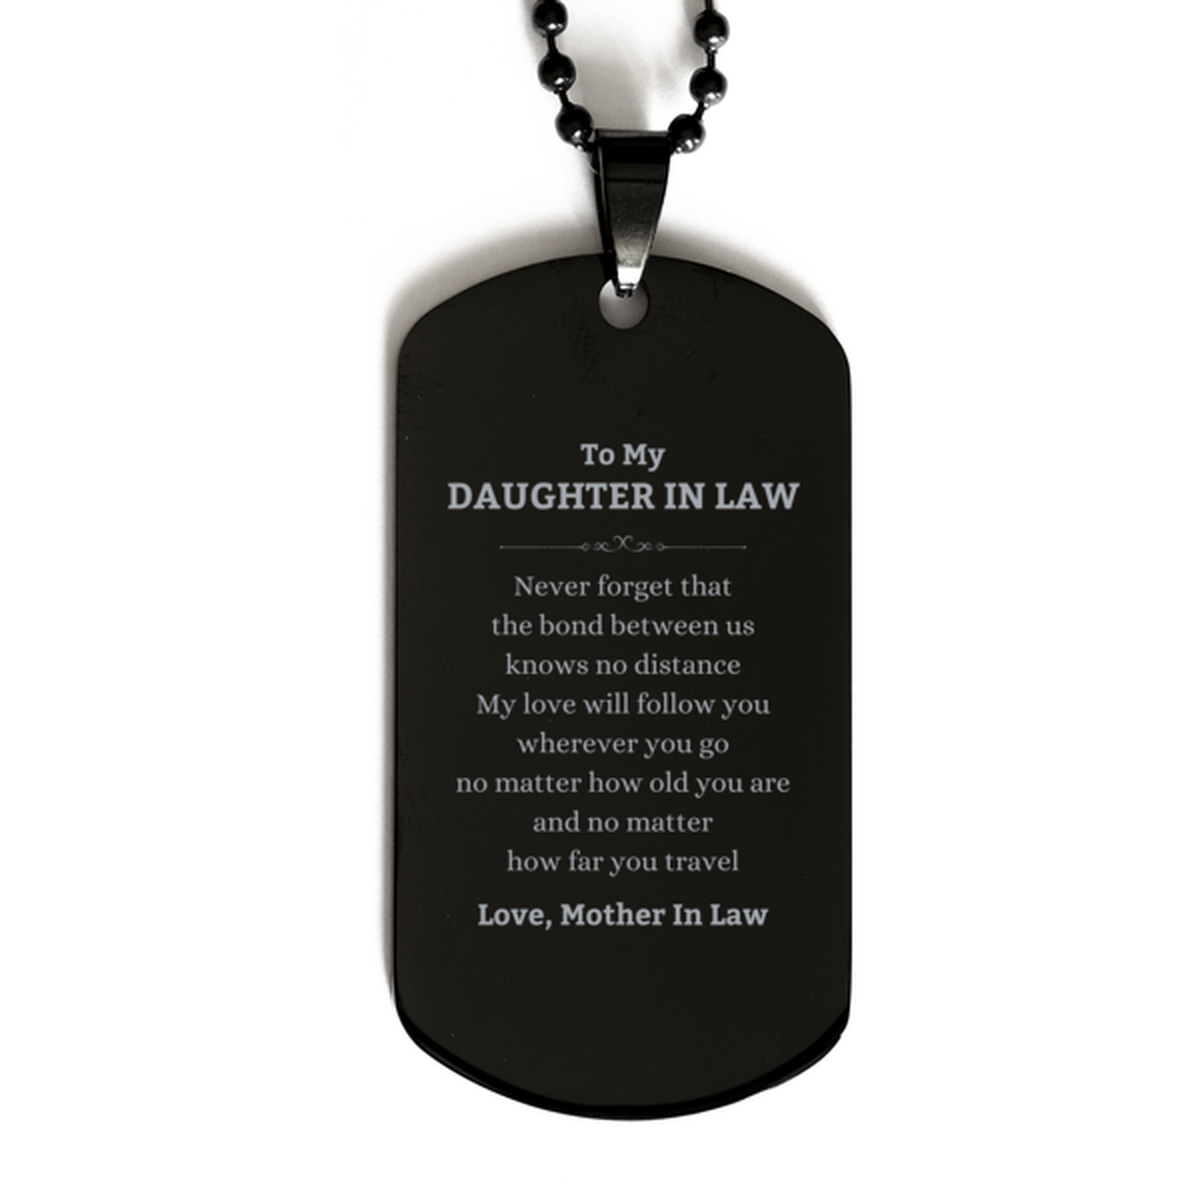 Daughter In Law Birthday Gifts from Mother In Law, Adjustable Black Dog Tag for Daughter In Law Christmas Graduation Unique Gifts Daughter In Law Never forget that the bond between us knows no distance. Love, Mother In Law